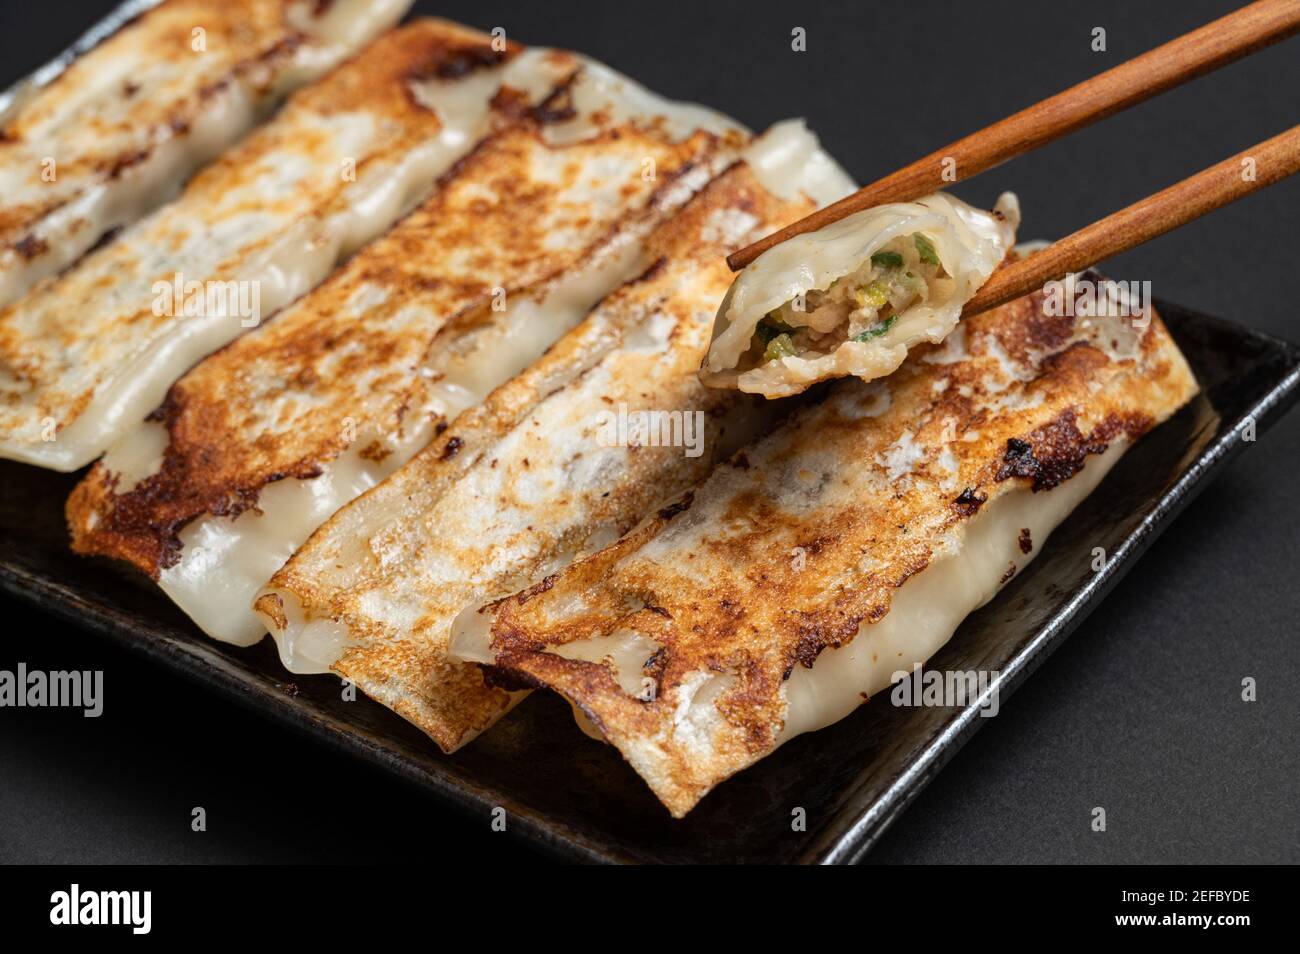 Material of traditional chinese fried dumplings(also called gyoza,pot sticker) on black background with chopsticks. Stock Photo